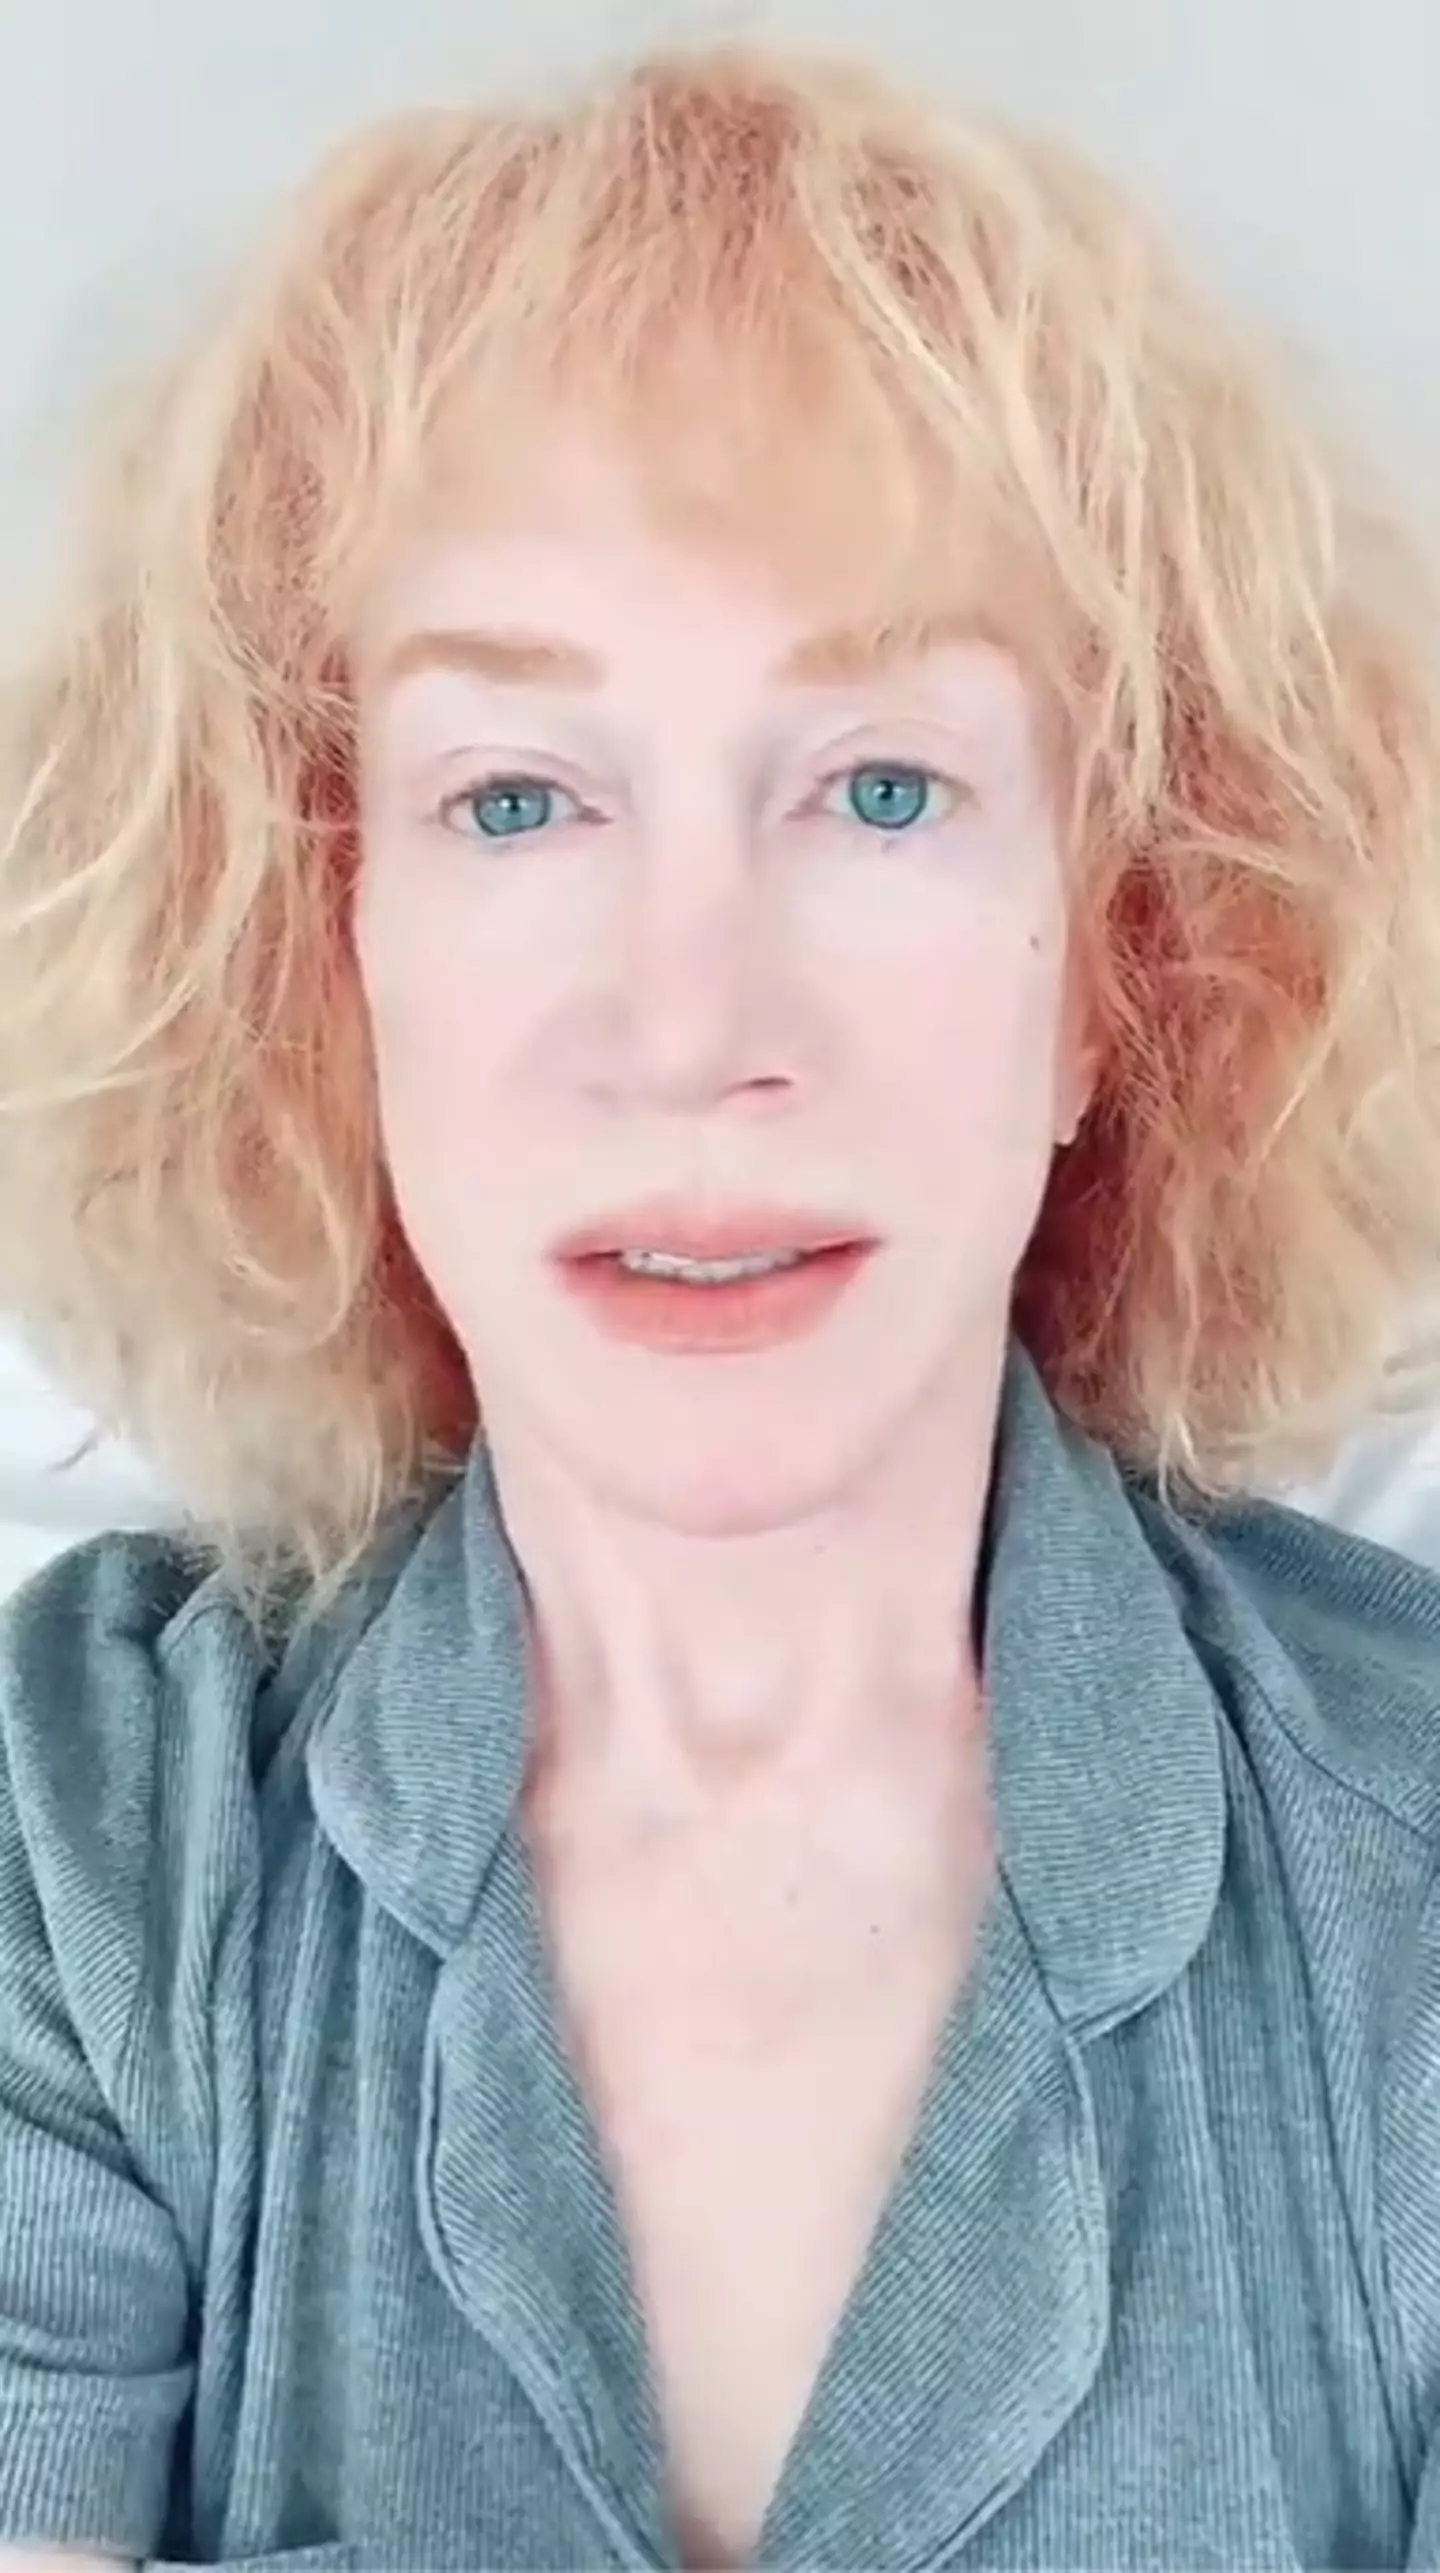 Kathy Griffin opened up about her diagnosis on TikTok.